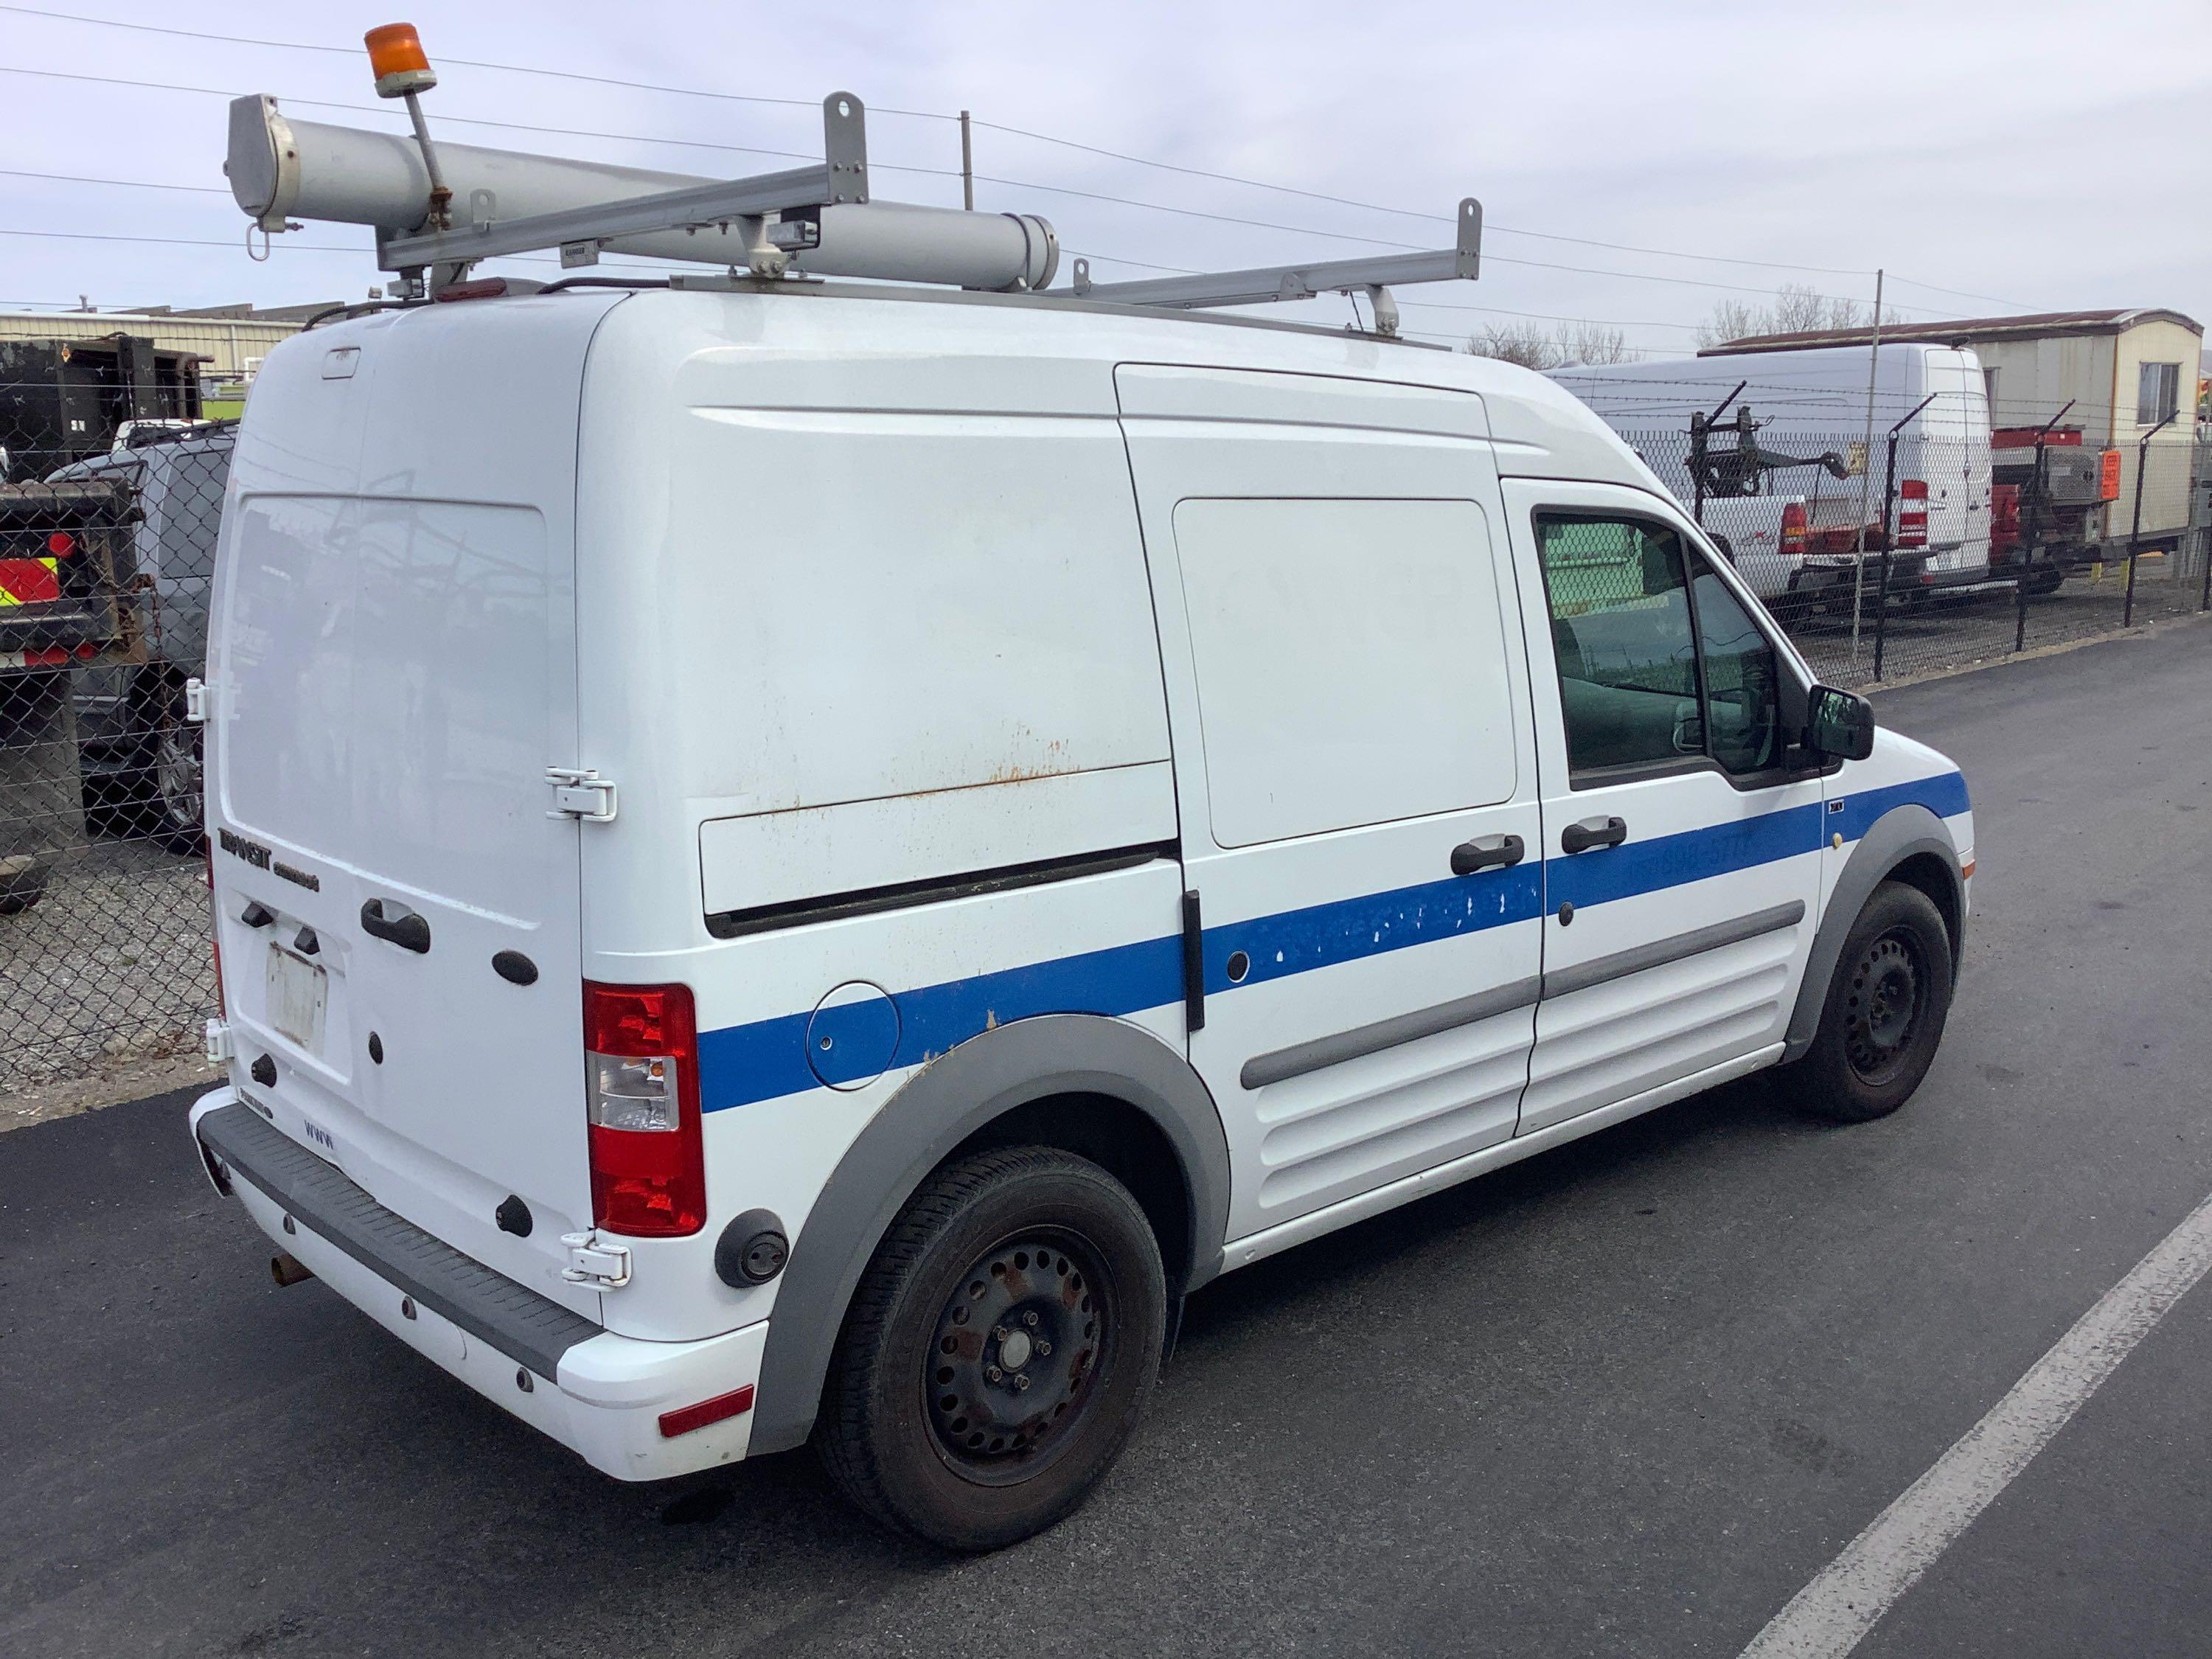 2011 FORD TRANSIT CONNECT UTILITY VAN (NO REVERSE)